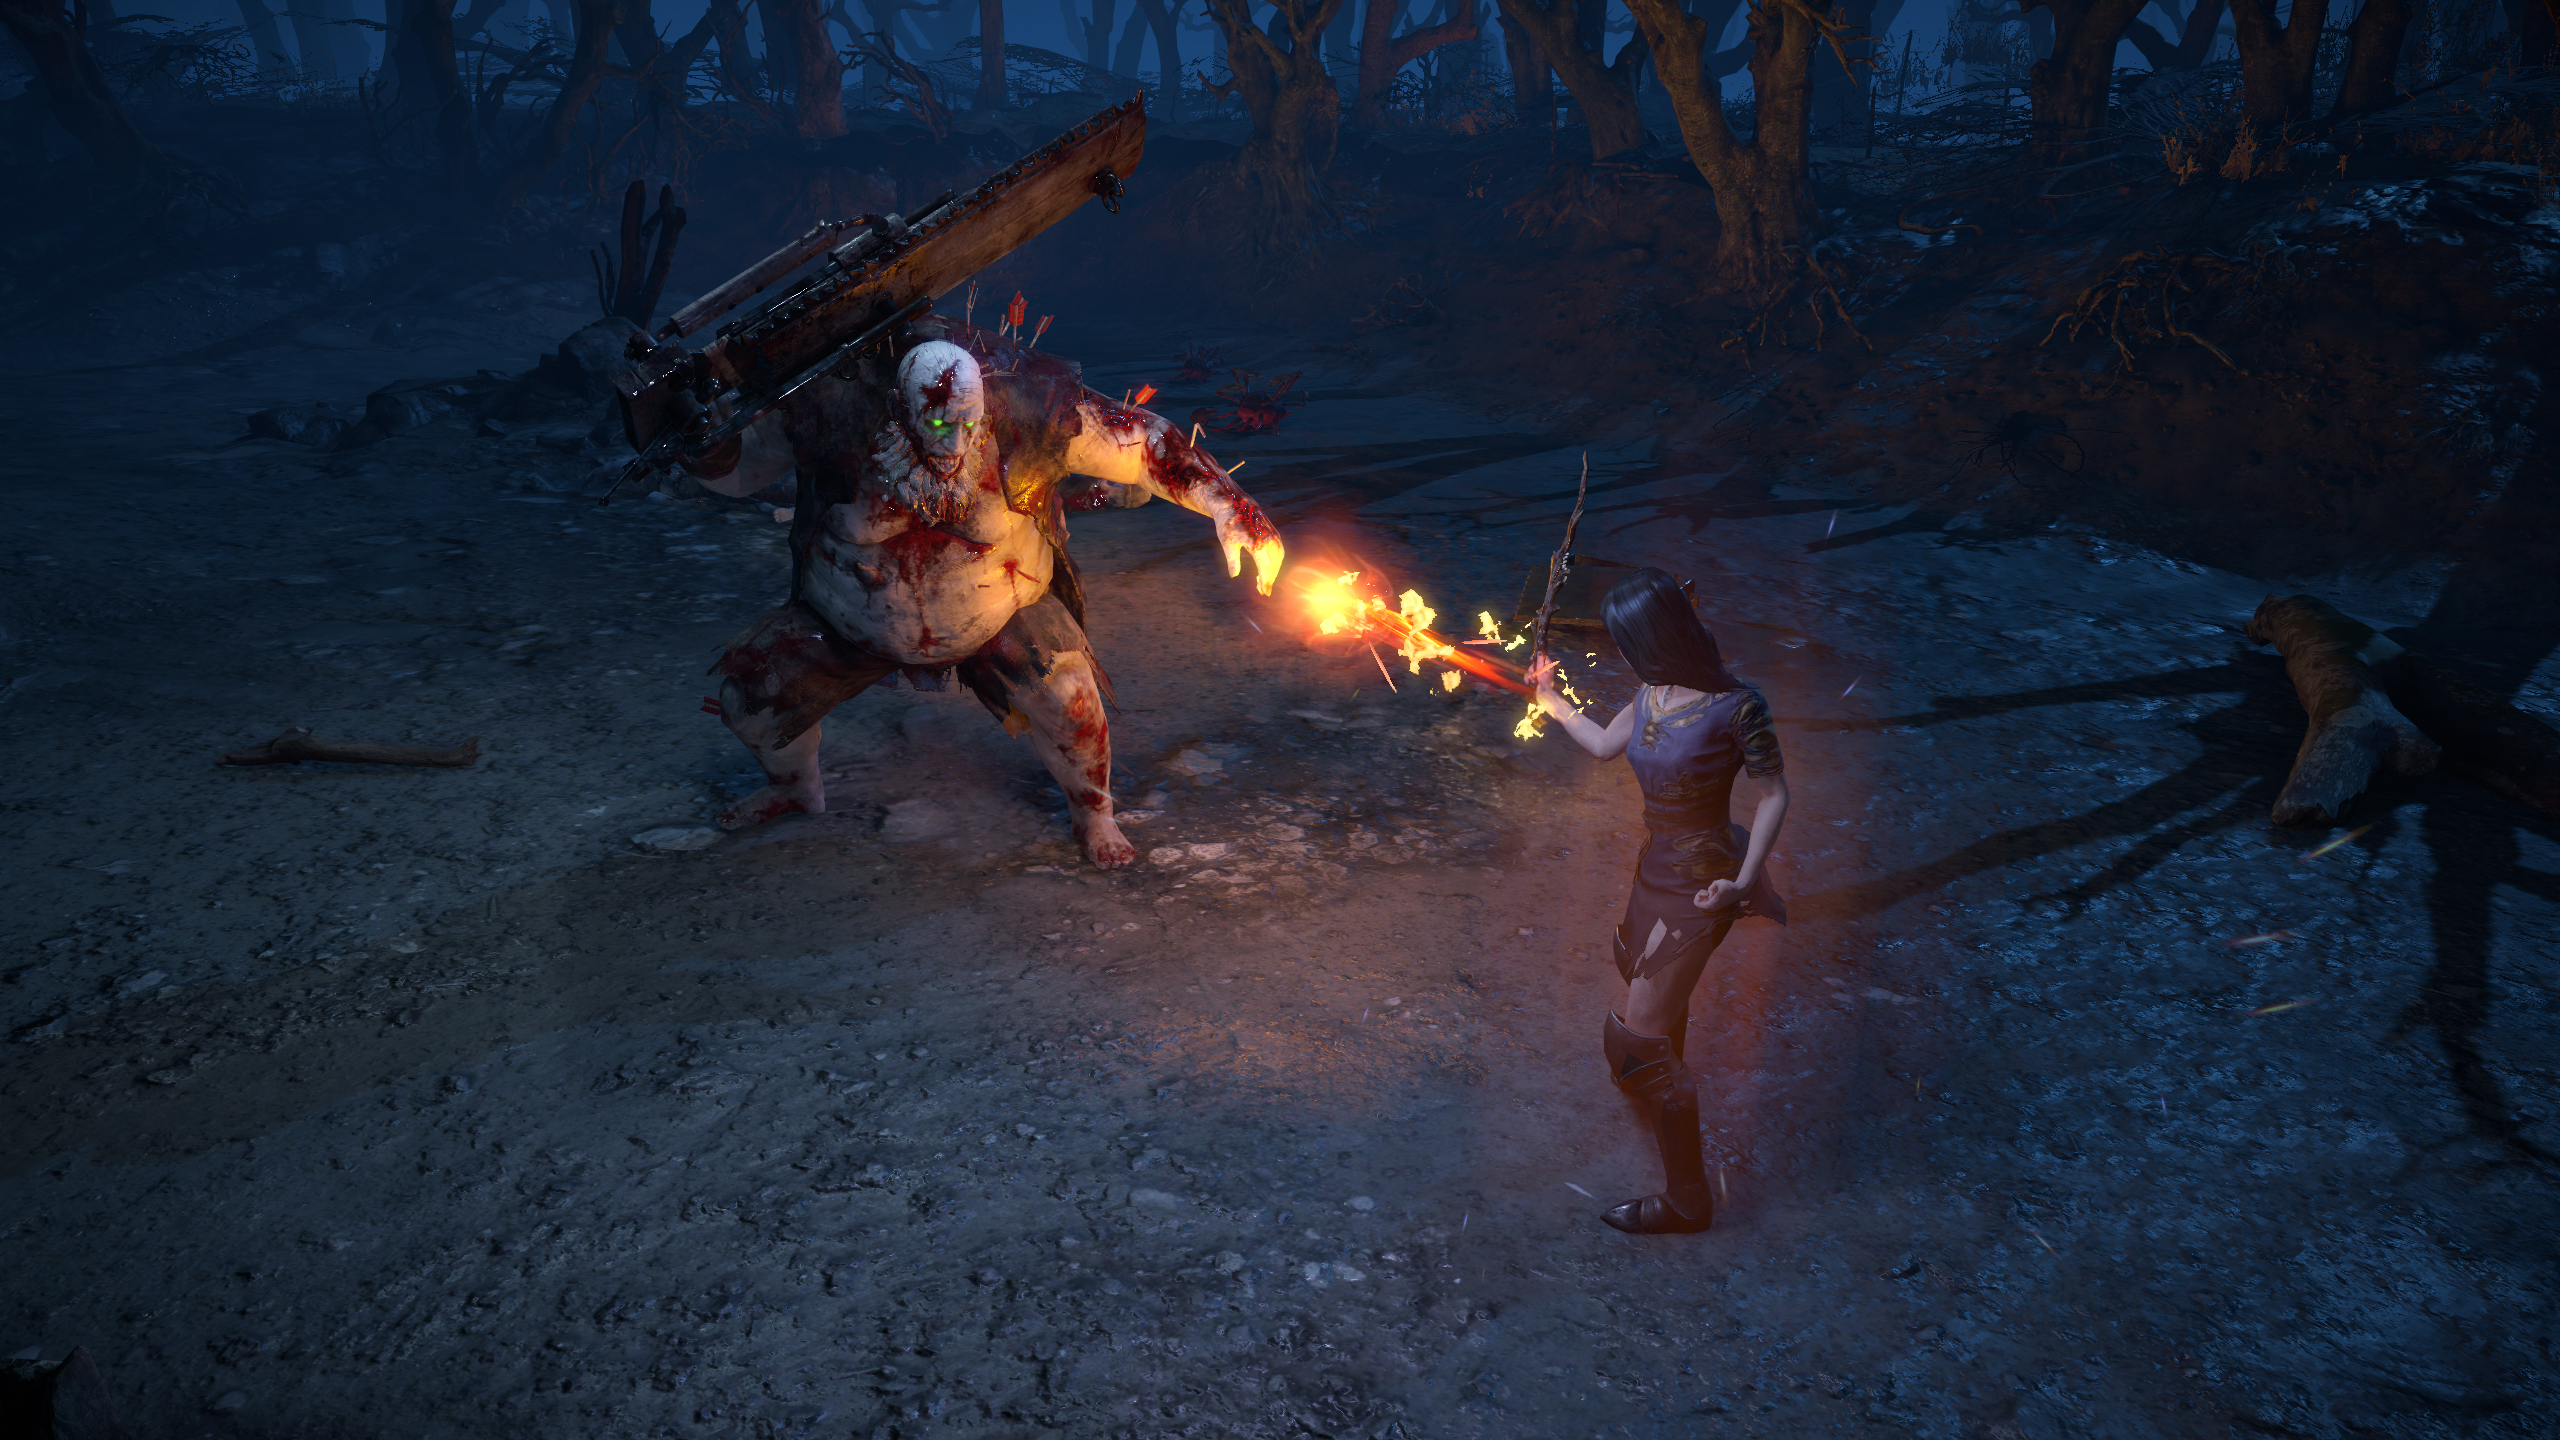  Path of Exile 2 reveals its gorgeous second act with a new trailer and 20-minute gameplay video 